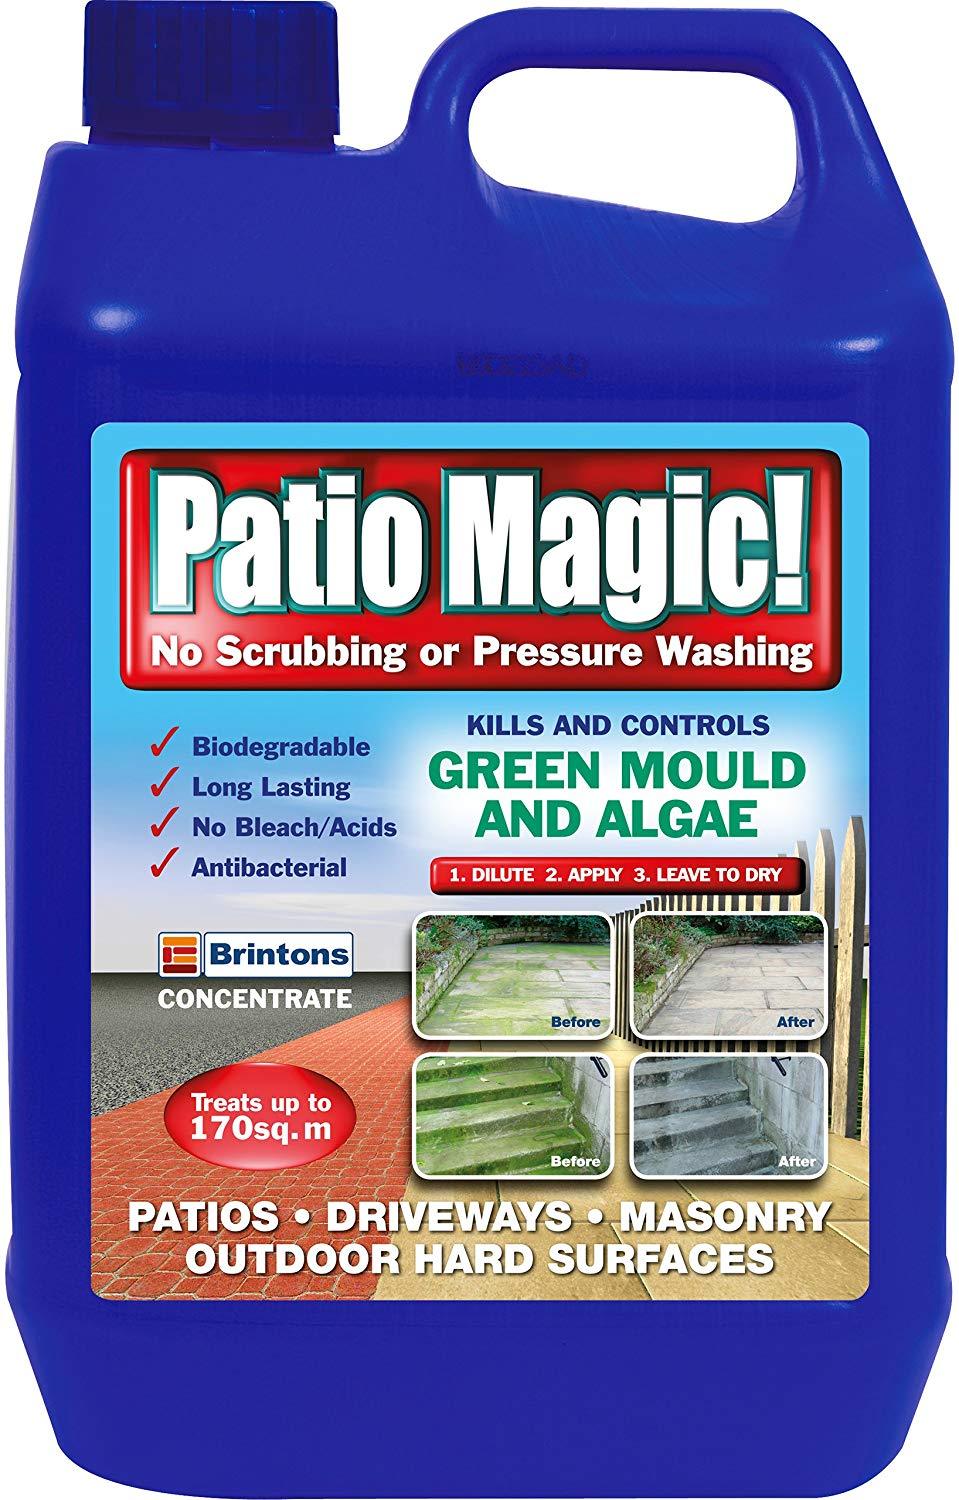 Patio Magic Concentrate For Patios Paths & Driveways 5L Garden Diy Gardening Plantfood Weedkiller